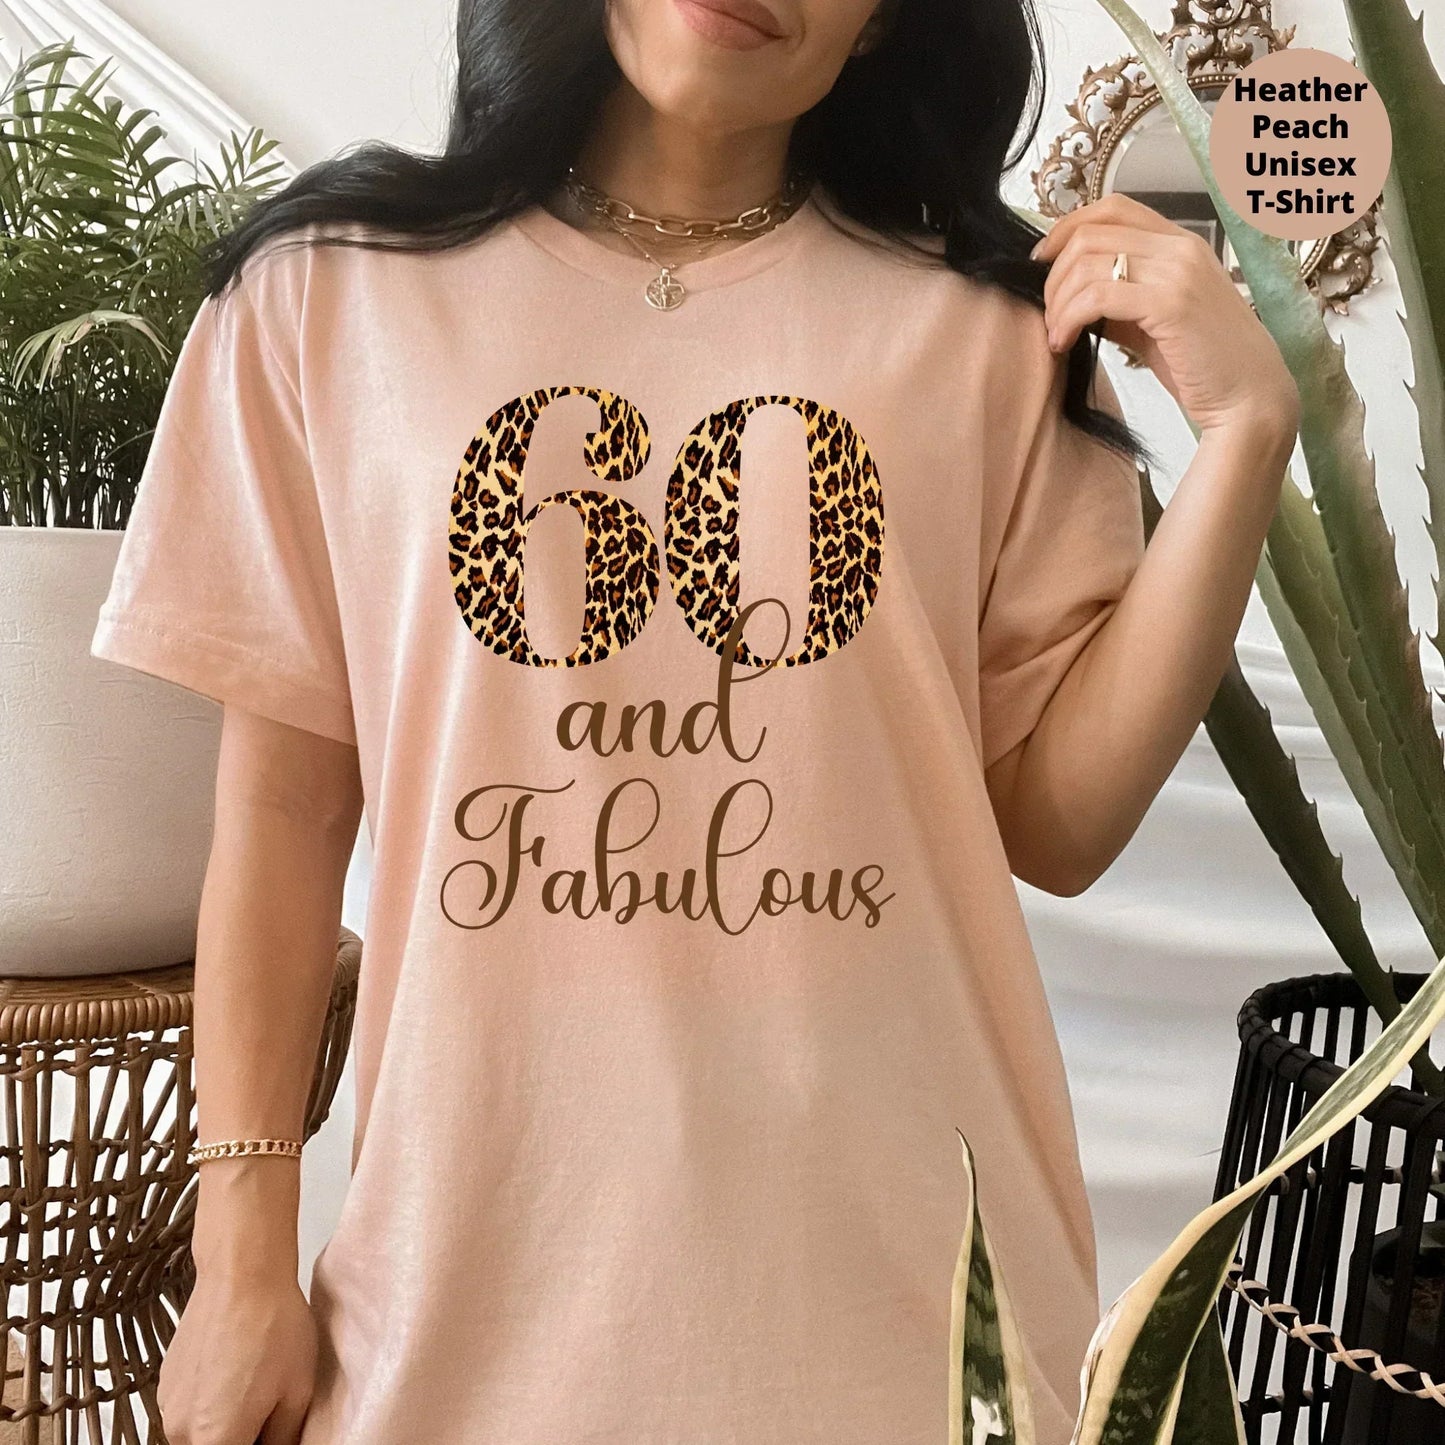 Sixty and Fabulous Birthday Shirt, Embrace Your Wisdom and Celebrate Your 60th Birthday with Style - Get Your Premium Birthday Shirt Today! HMDesignStudioUS